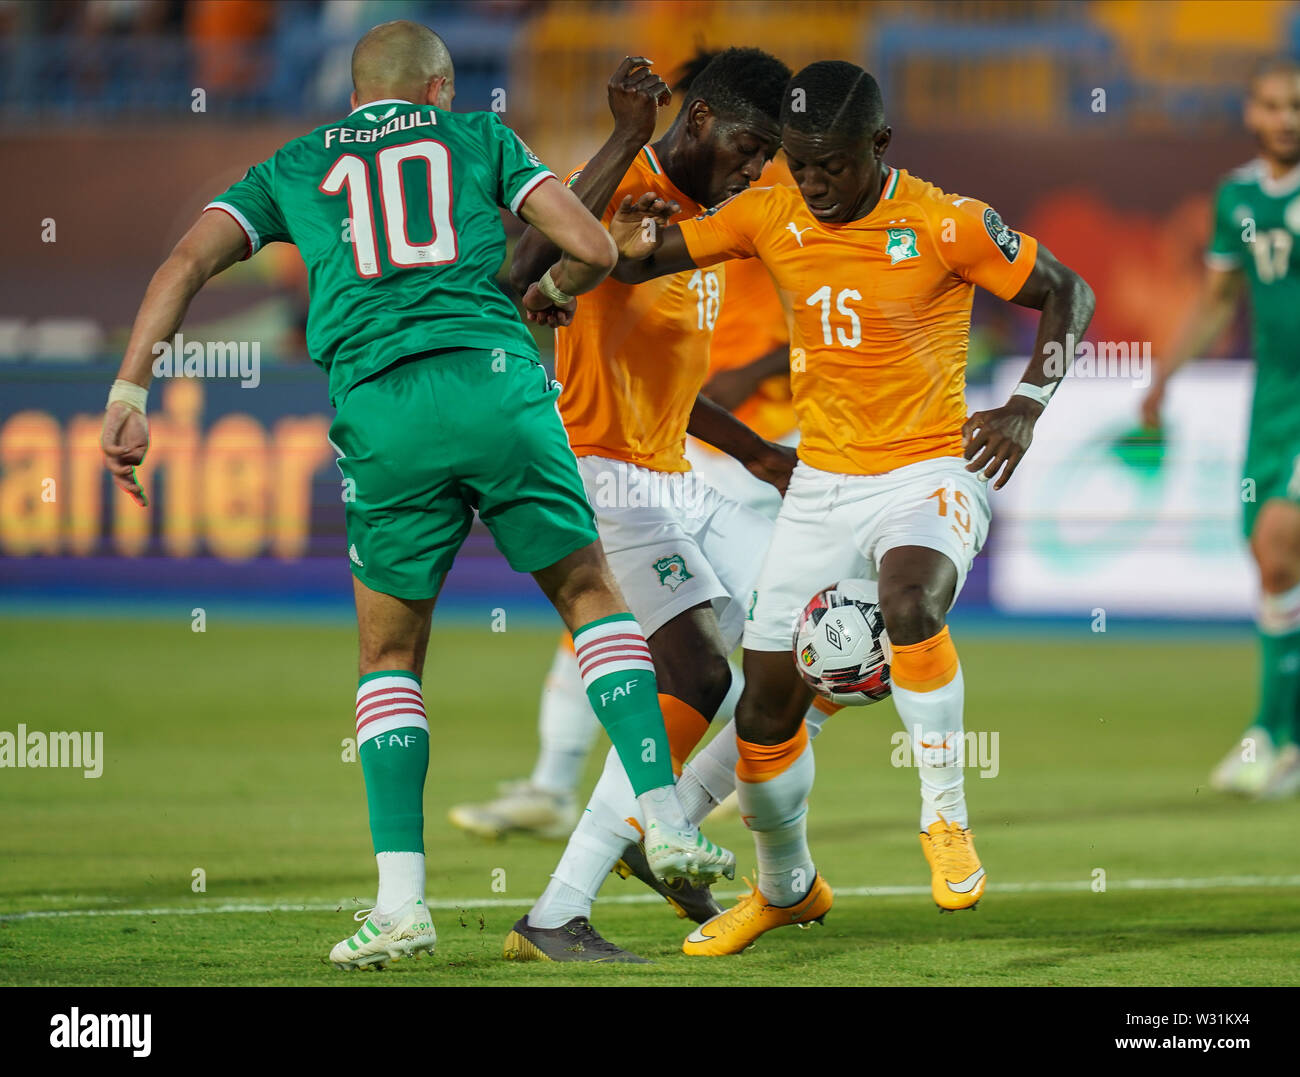 Suez, Egypt. 11th July, 2019. Ivory coast, Egypt - FRANCE OUT July 11, 2019: Max Alain Gradel of Cote D'ivoire trying to go past Sofiane Feghouli of Algeria during the 2019 African Cup of Nations match between Ivory coast and Algeria at the Suez Stadium in Suez, Egypt. Ulrik Pedersen/CSM/Alamy Live News Stock Photo